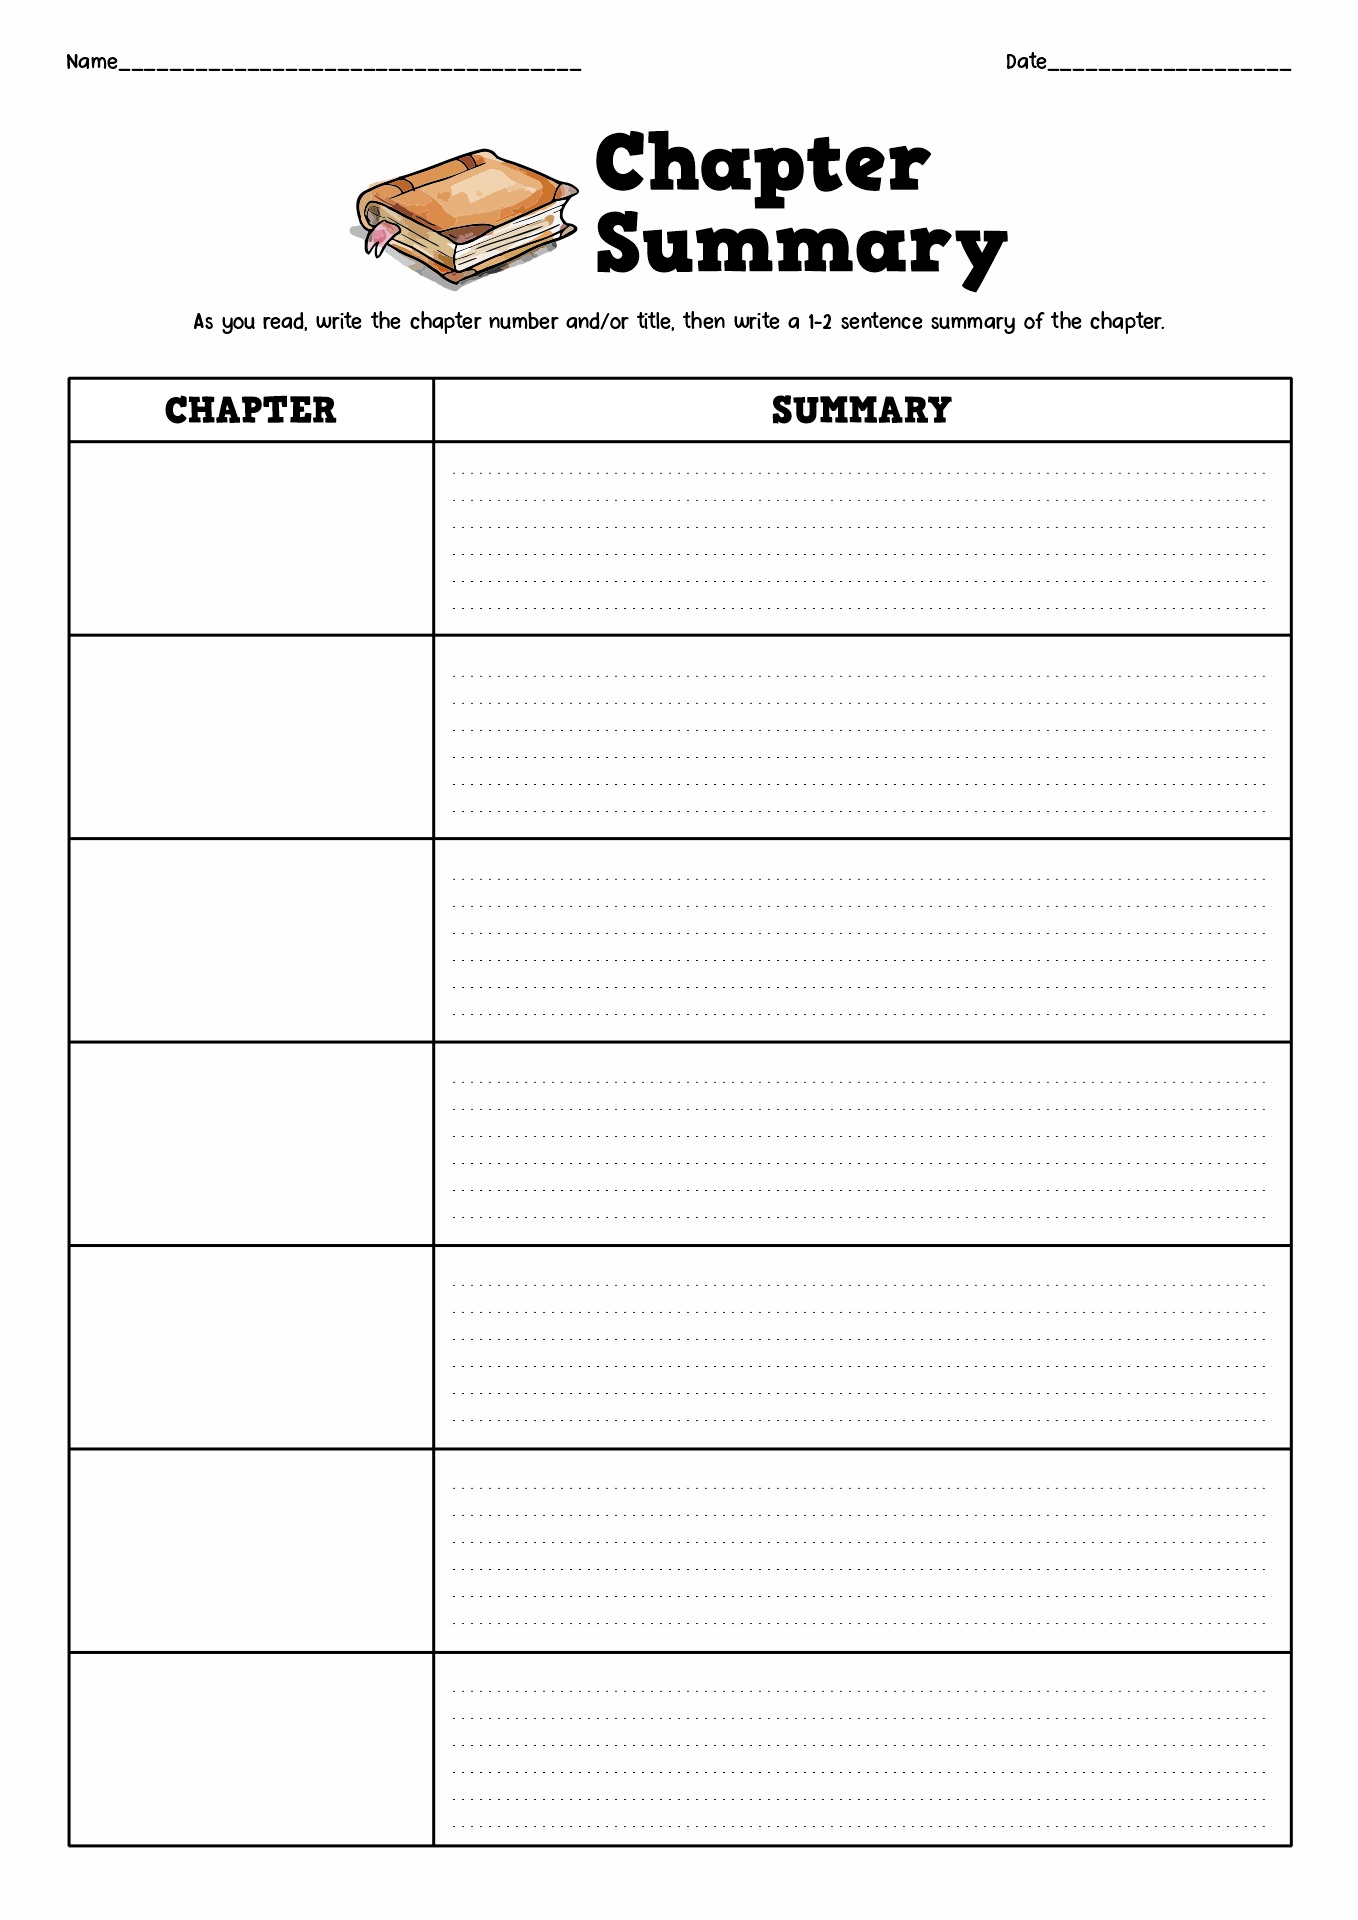 11 Best Images of Printable Summary Worksheet - Printable Chapter ...